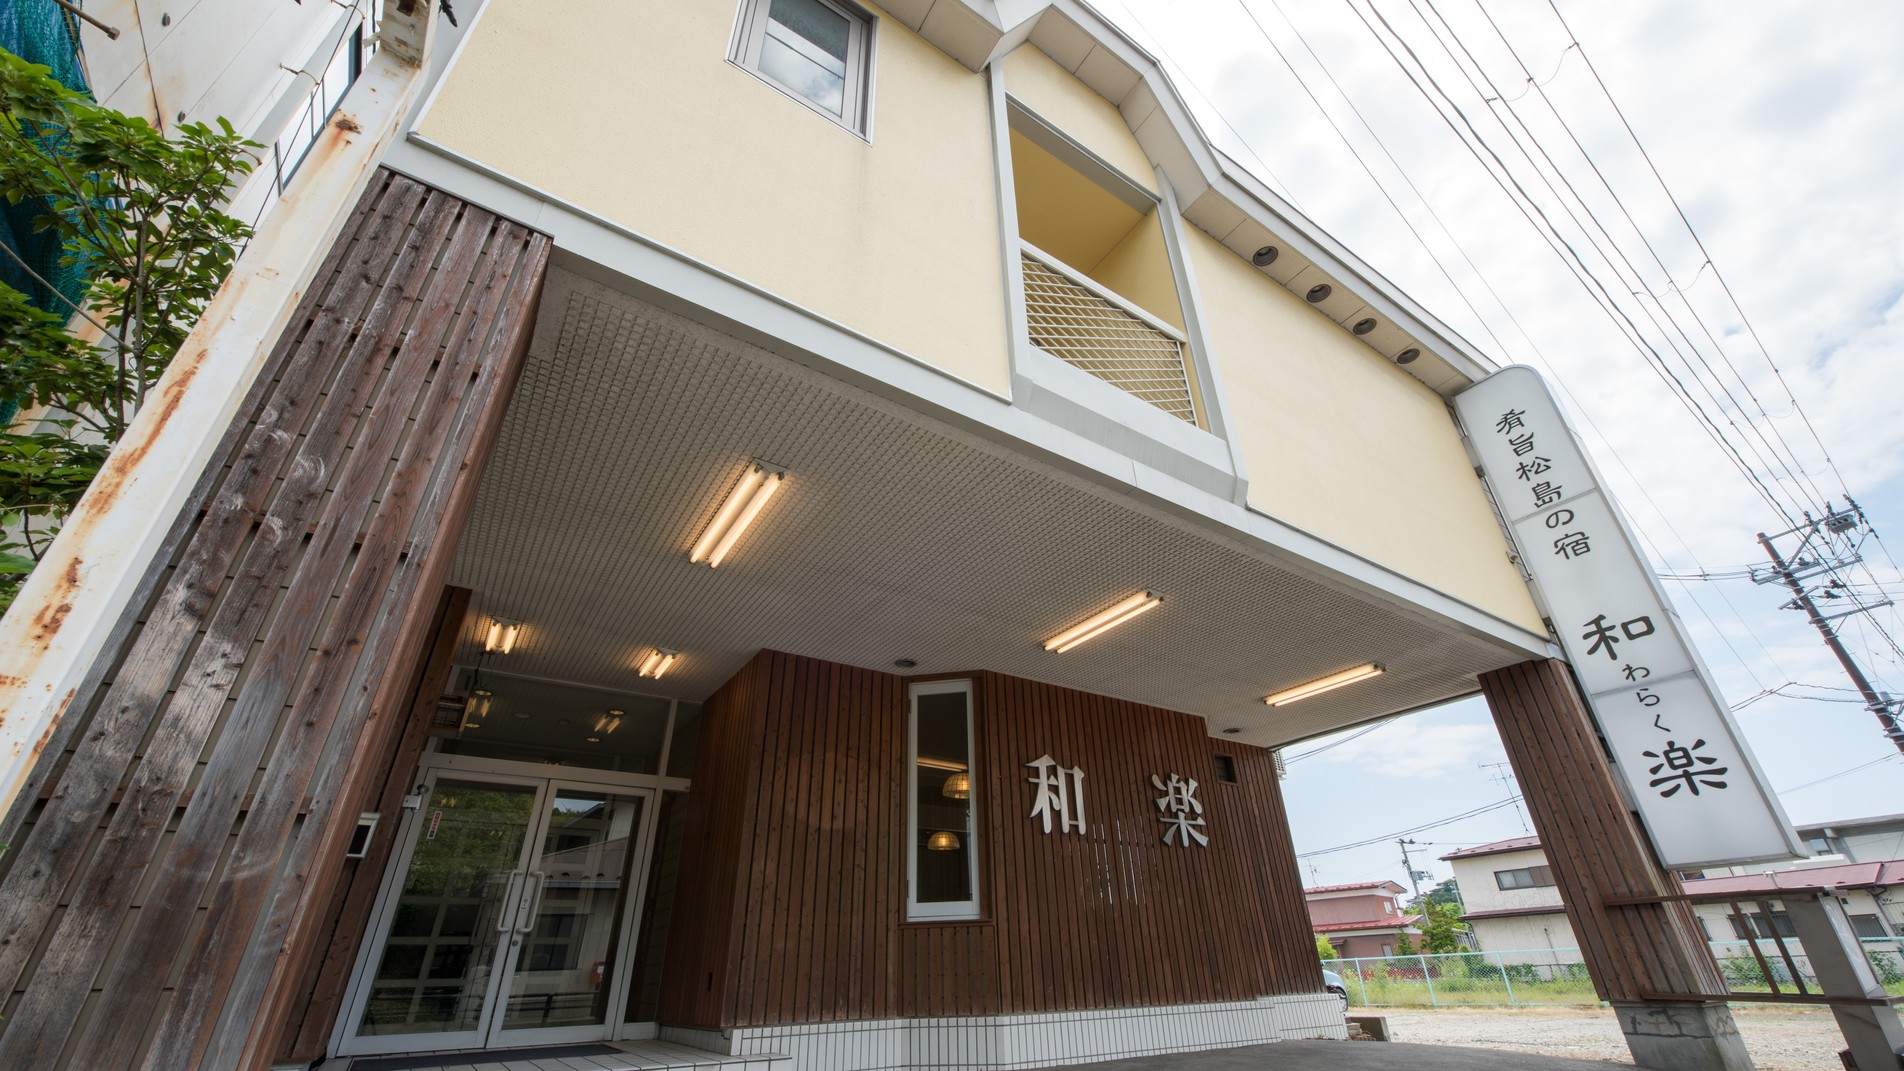 Matsushima Hotel Waraku Matsushima Hotel Waraku is a popular choice amongst travelers in Matsushima, whether exploring or just passing through. Offering a variety of facilities and services, the property provides all you nee